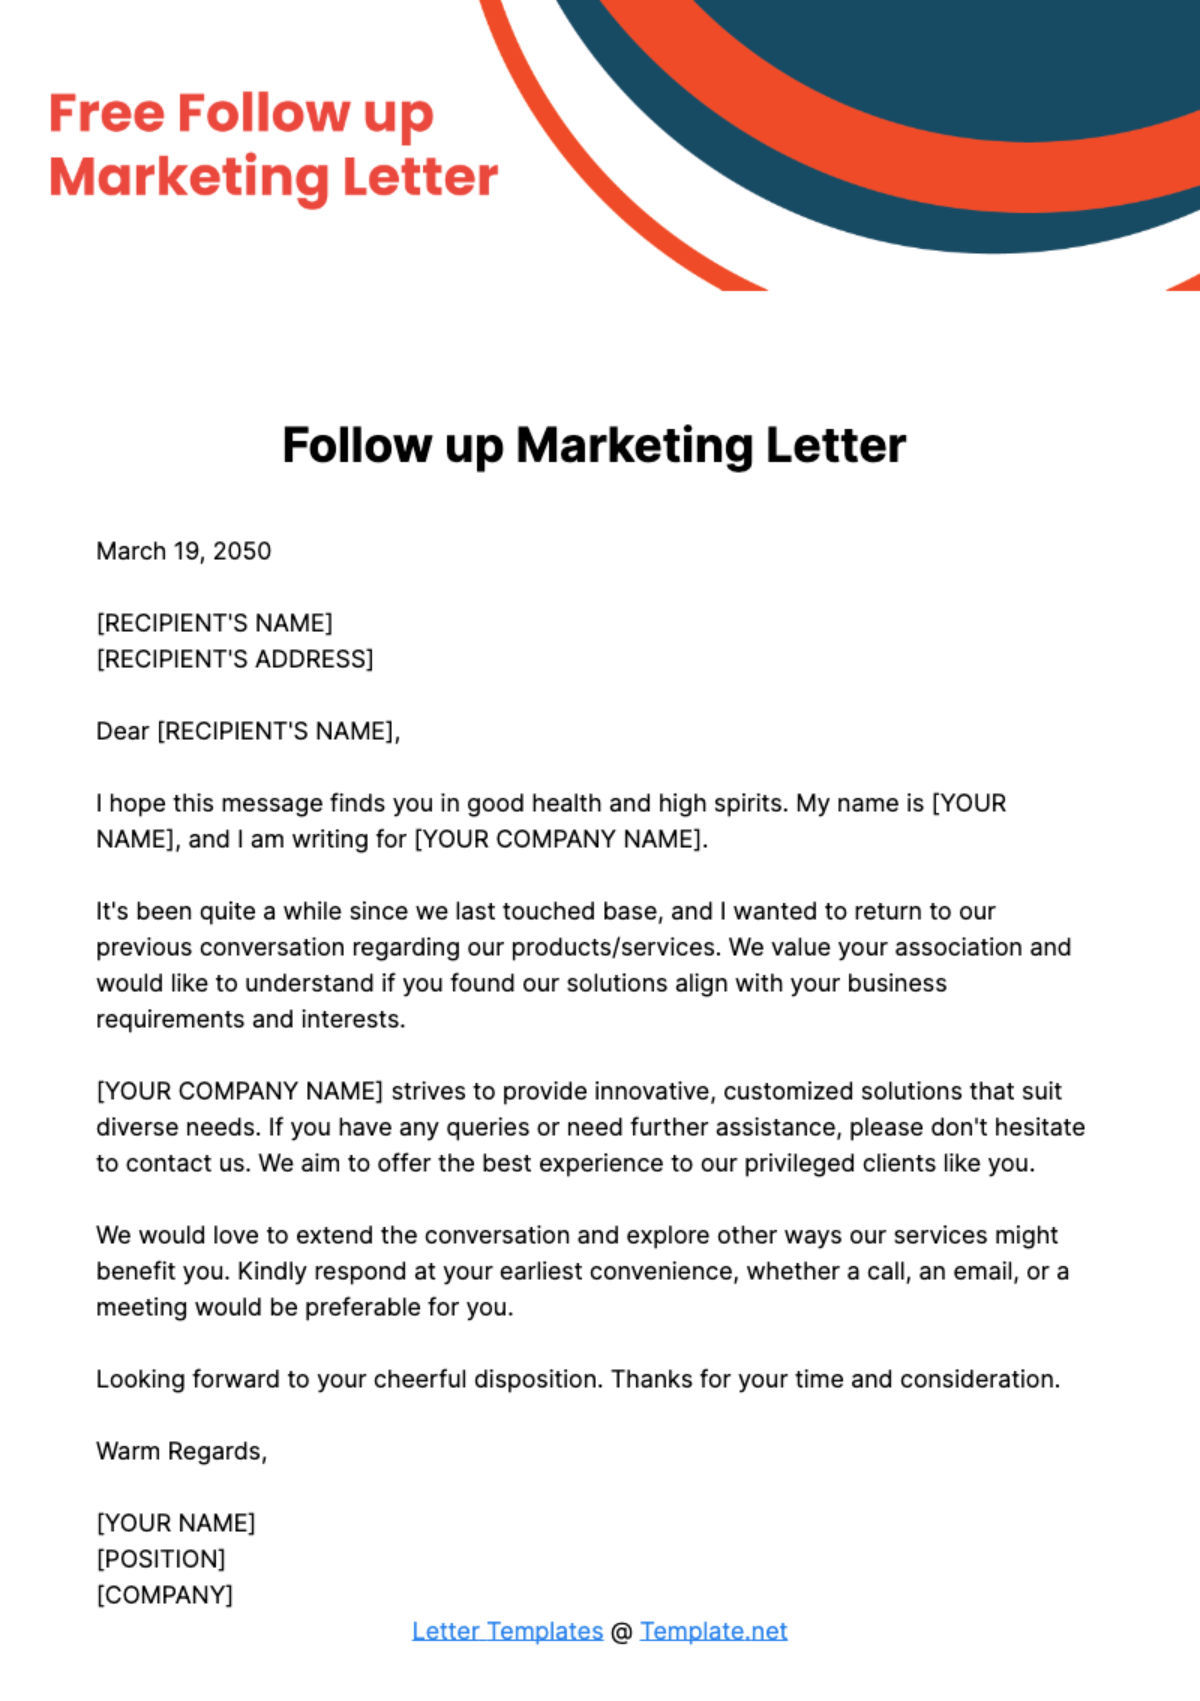 Free Follow up Marketing Letter Template